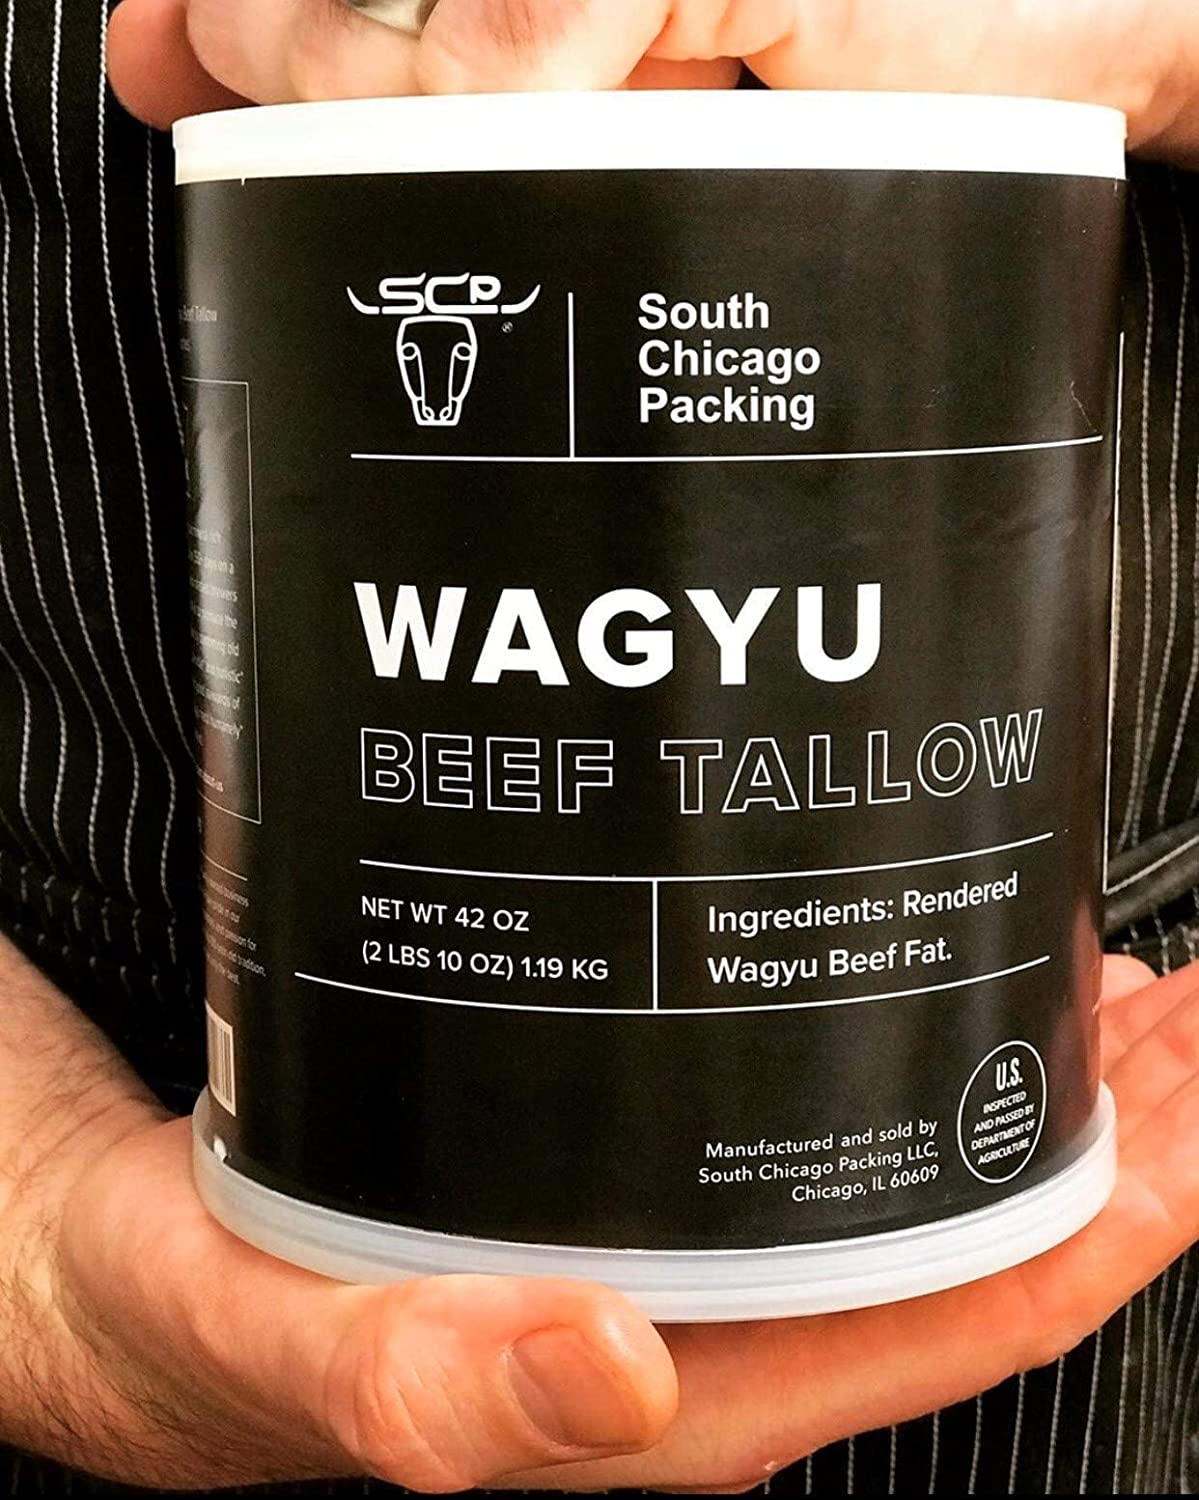 South Chicago Packing Wagyu Beef Tallow, 42 Ounces, Paleo-Friendly, Keto-Friendly, 100% Pure Wagyu